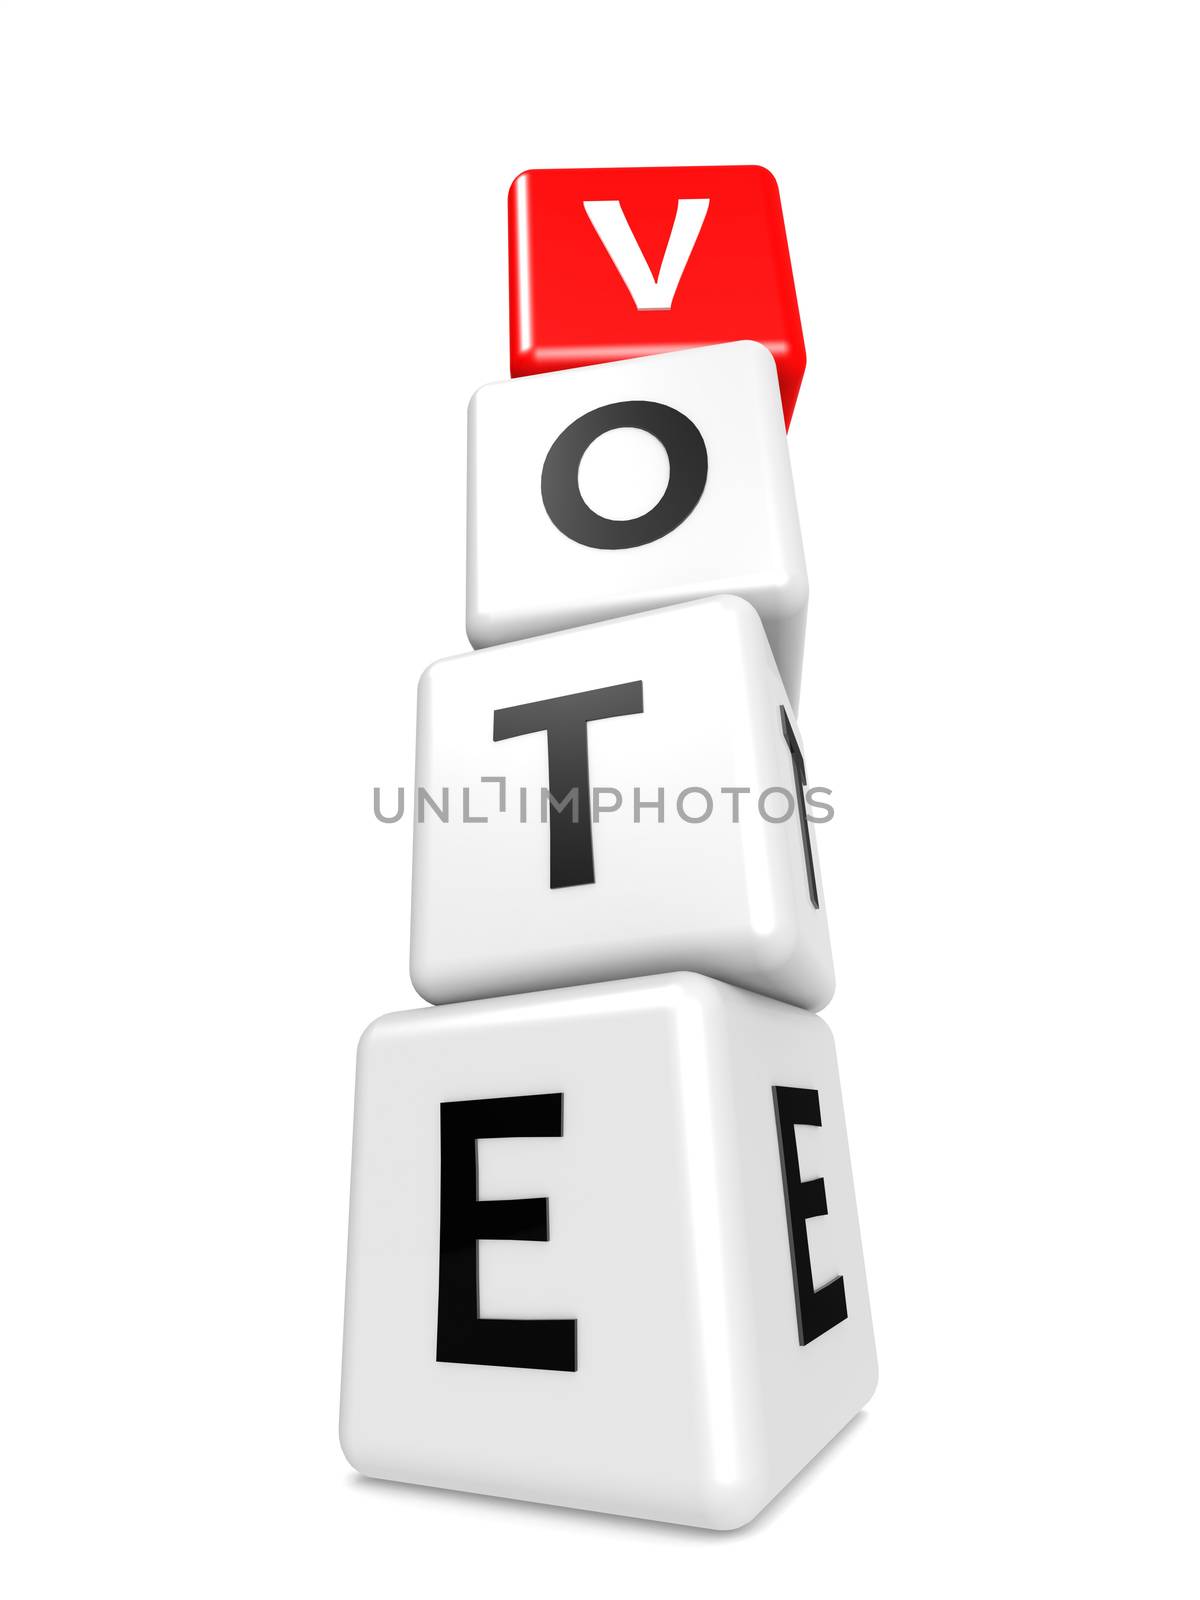 Buzzword vote image with hi-res rendered artwork that could be used for any graphic design.